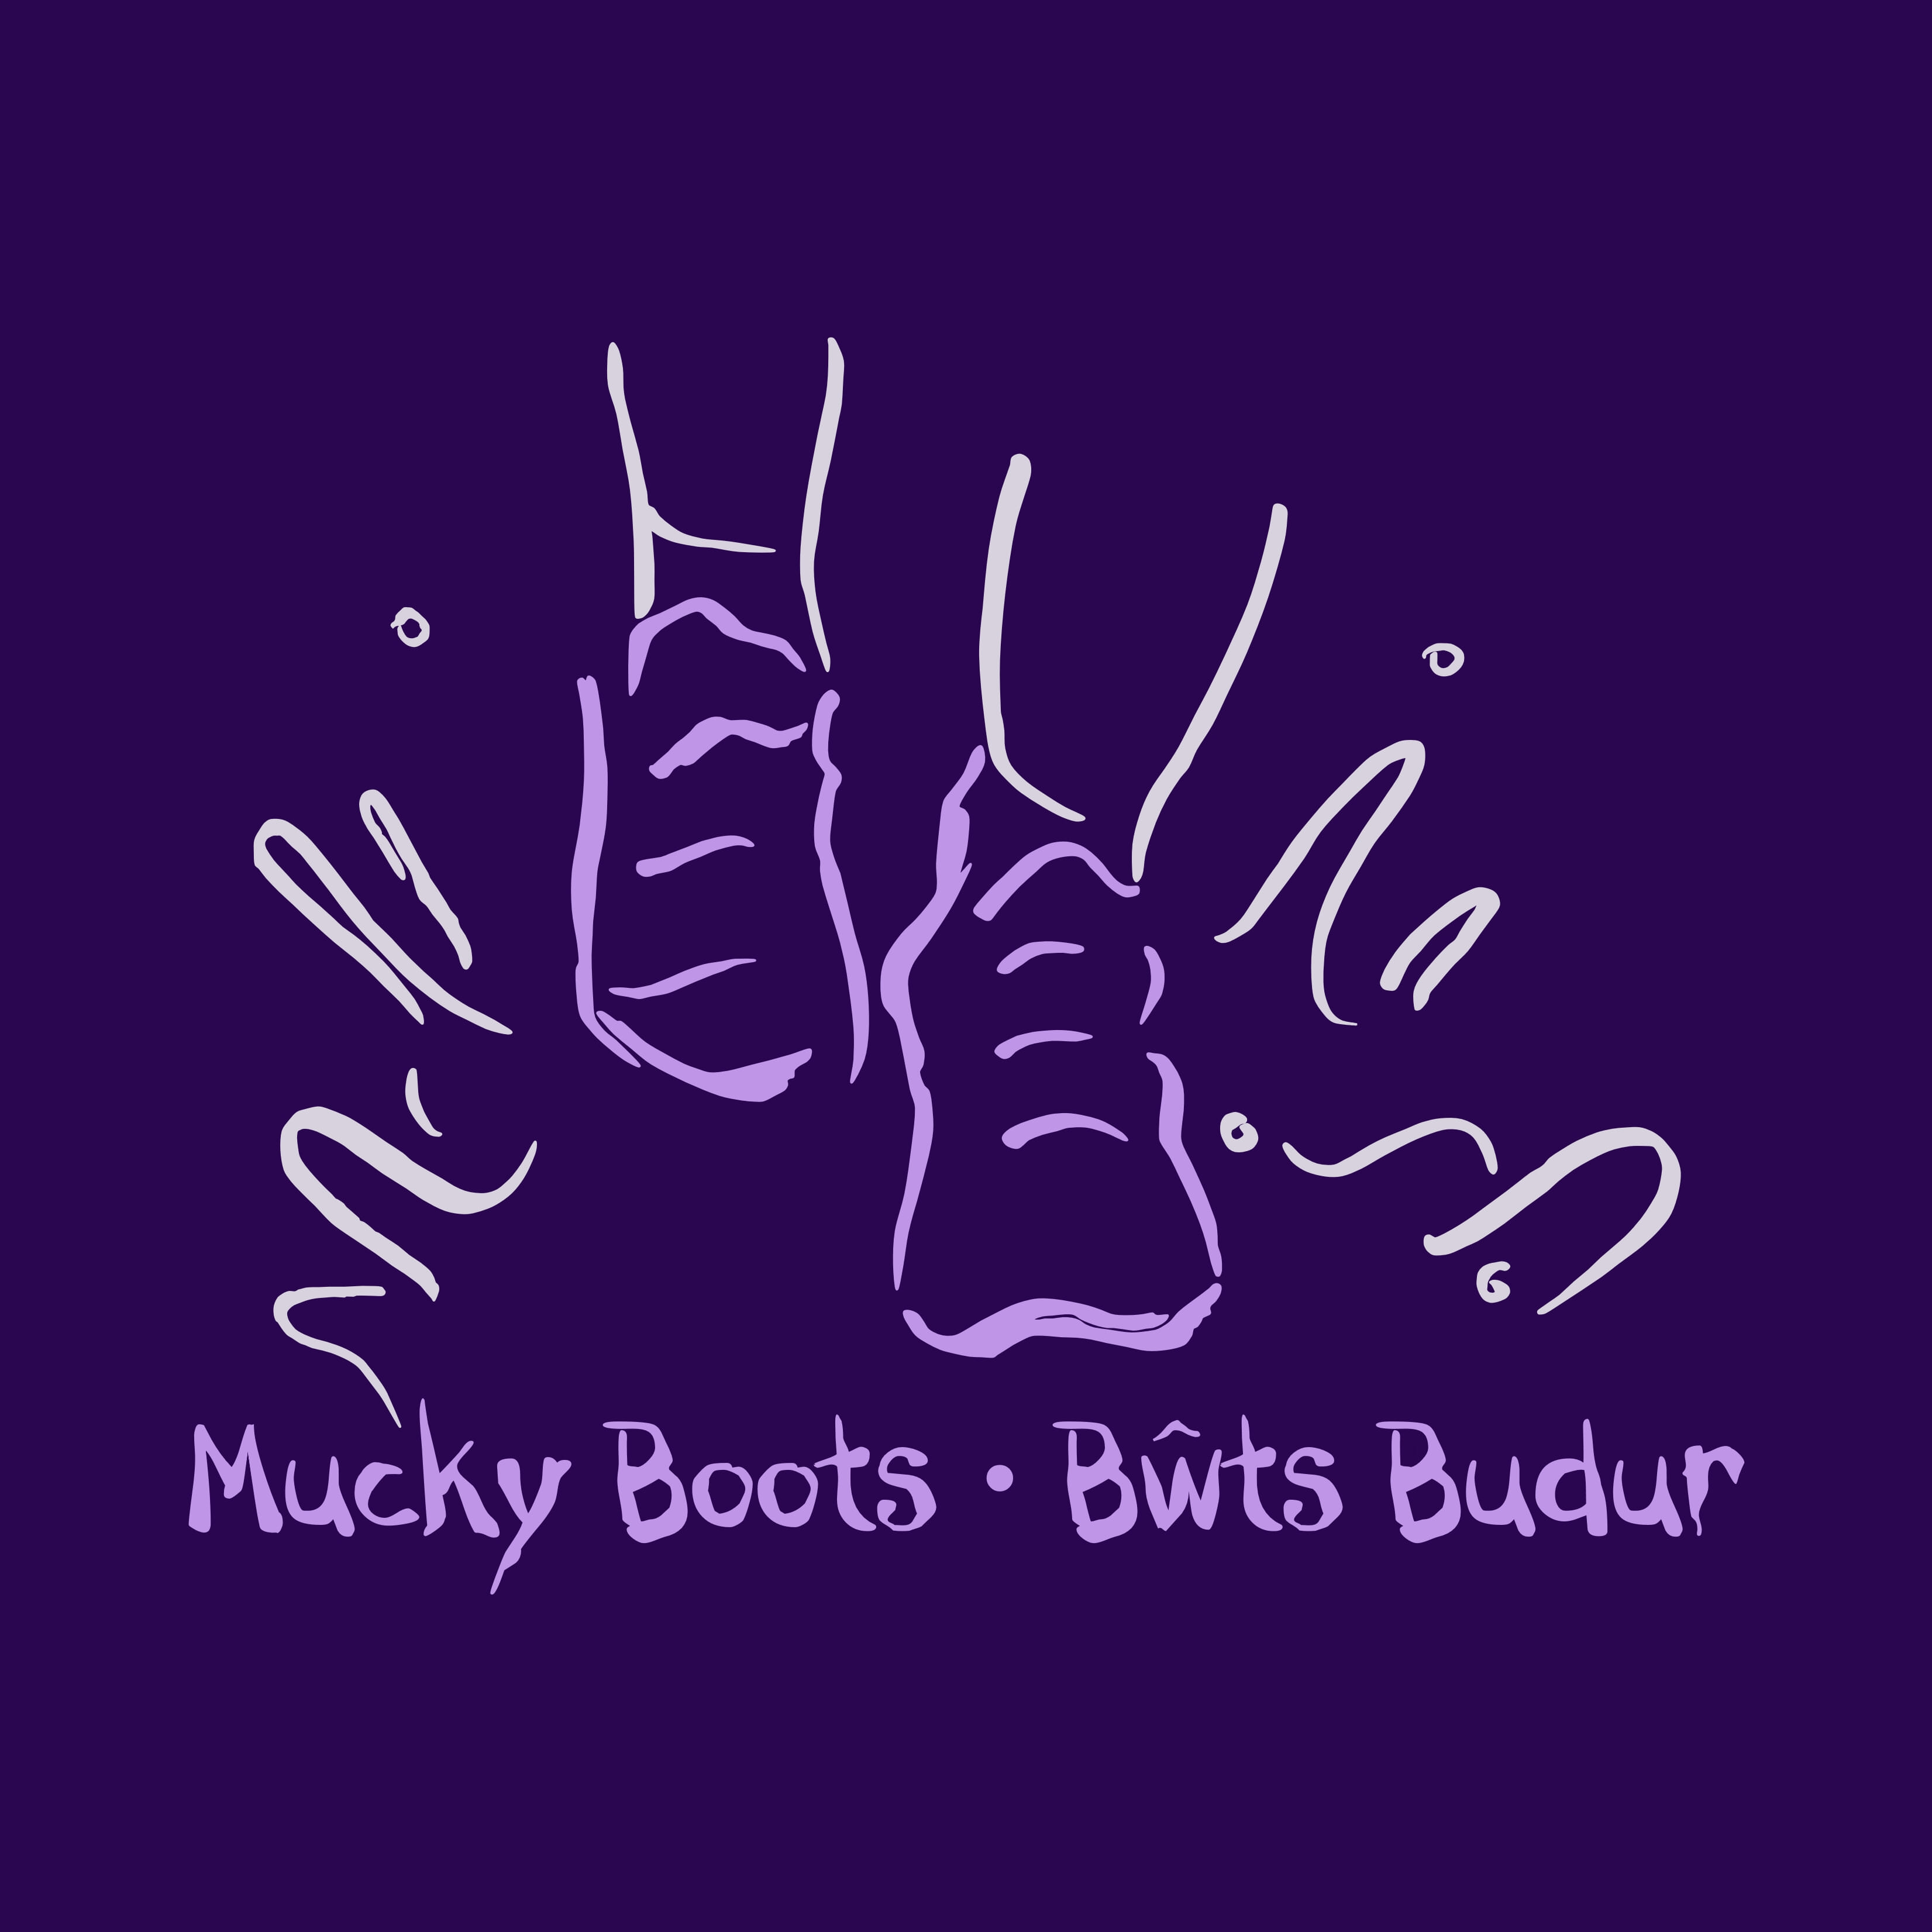 Mucky Boots Events